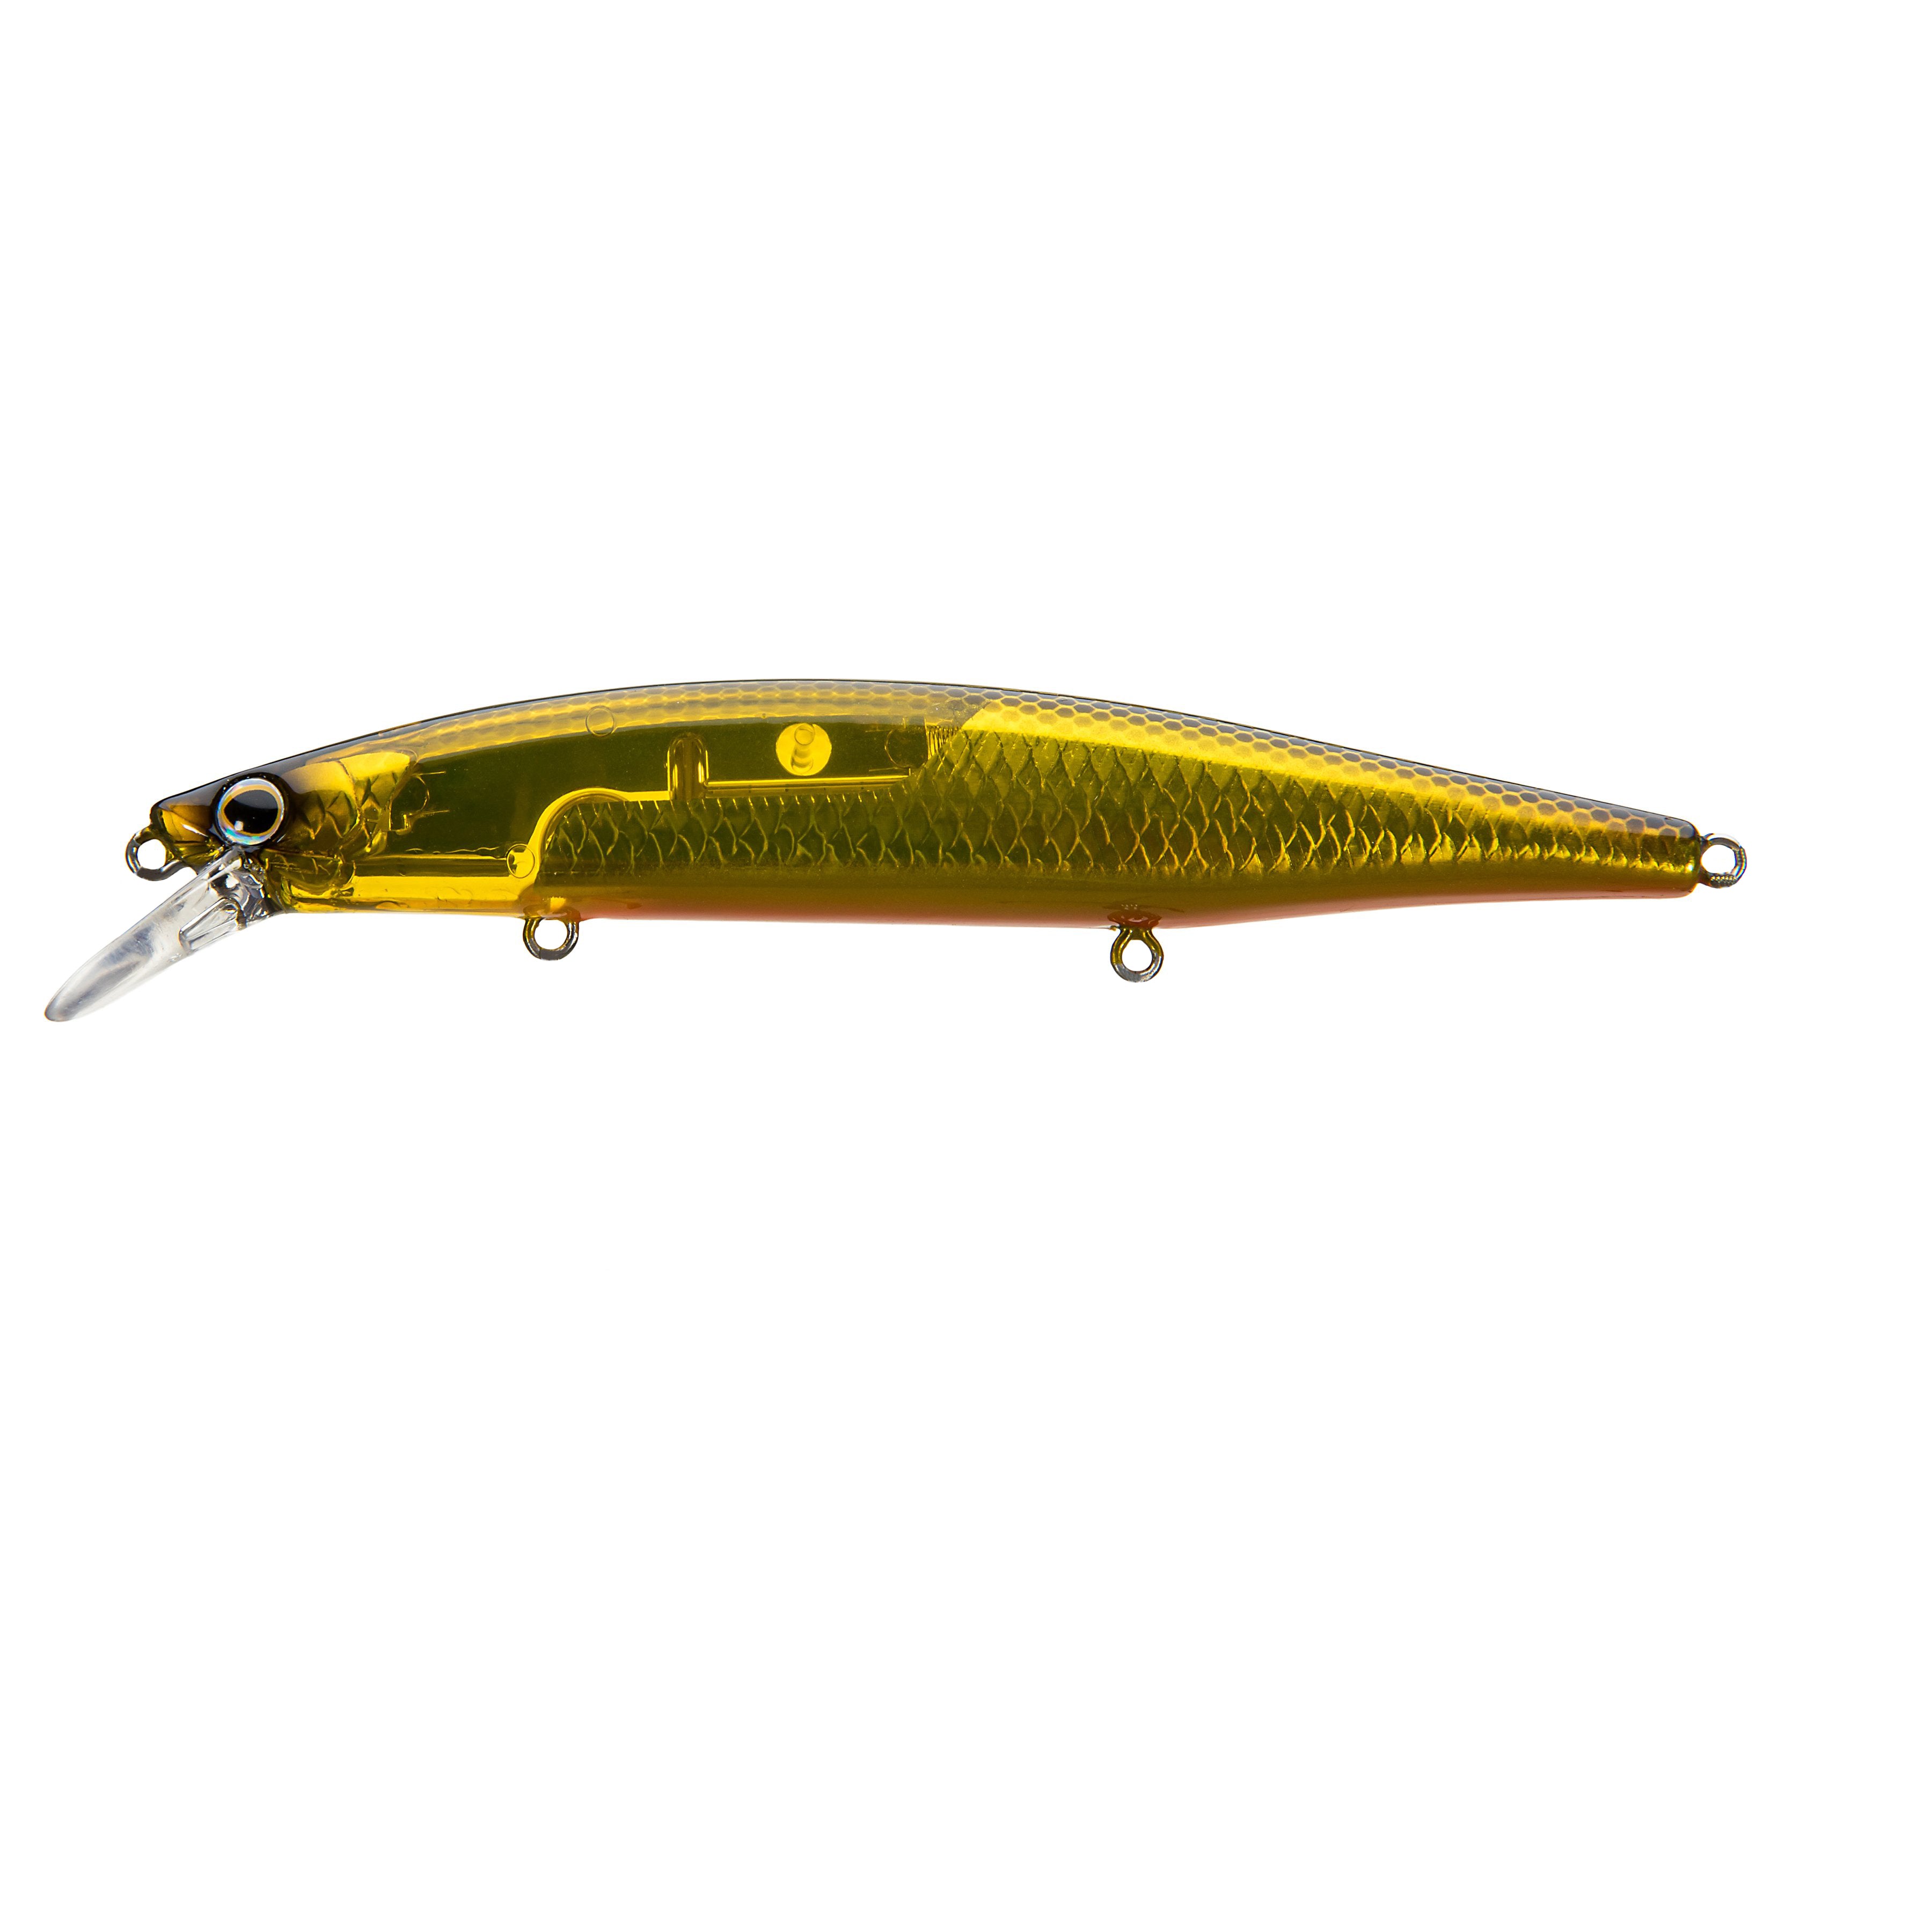 YiringEve Realistic Fishing Lures  Realistic Simulation Bait - Jerk Baits  for Bass Fishing, Fish lures, Baits & Attractants Saltwater and Freshwater  : Buy Online at Best Price in KSA - Souq